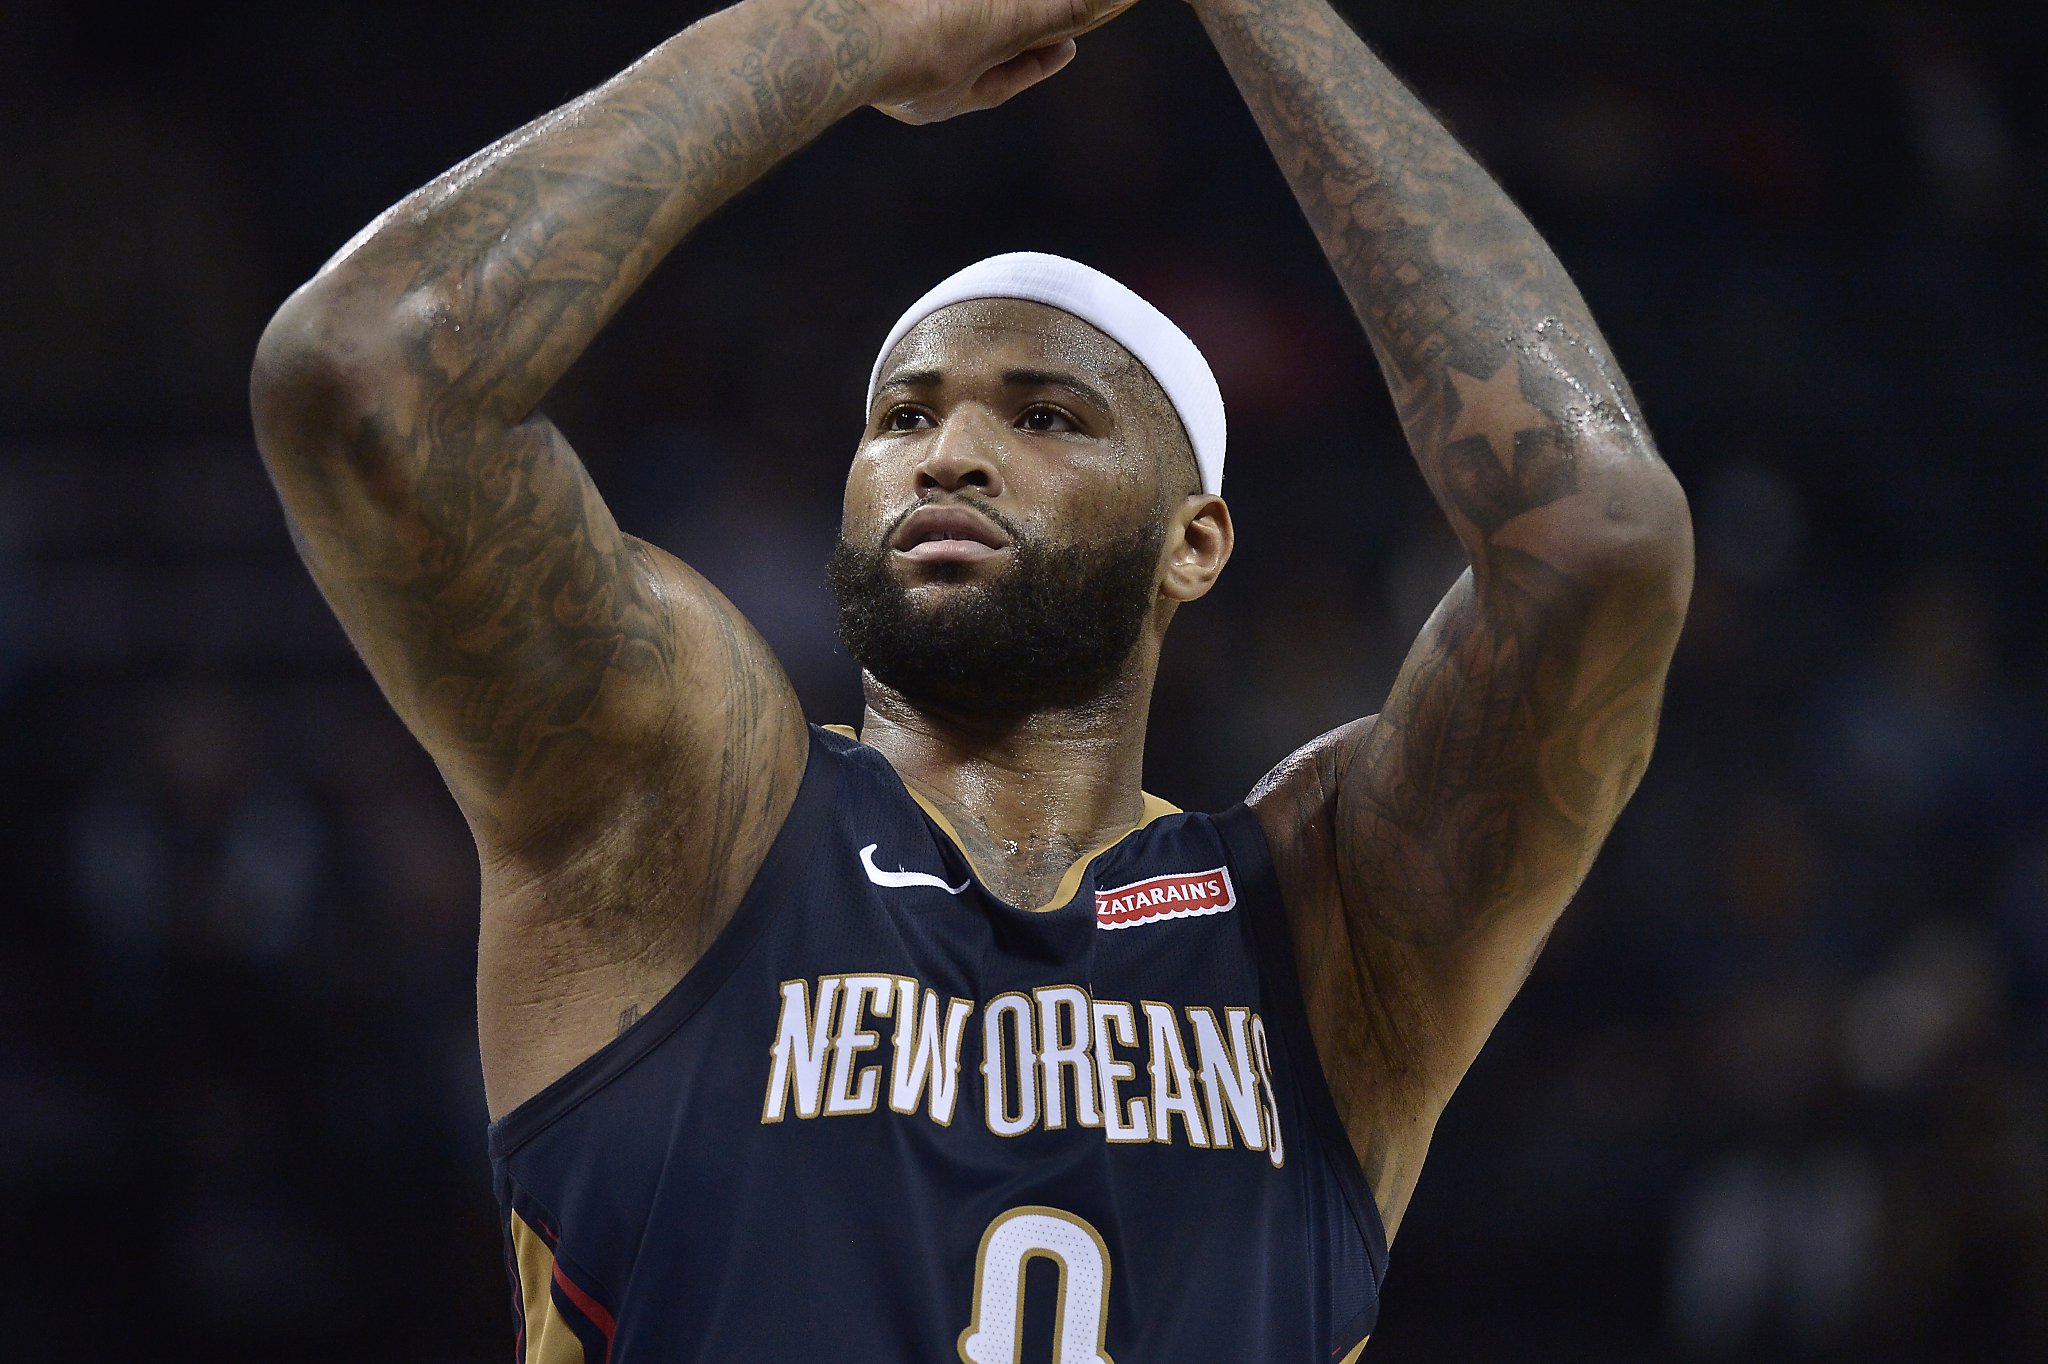 Kings' trade of DeMarcus Cousins means Warriors may face Pelicans